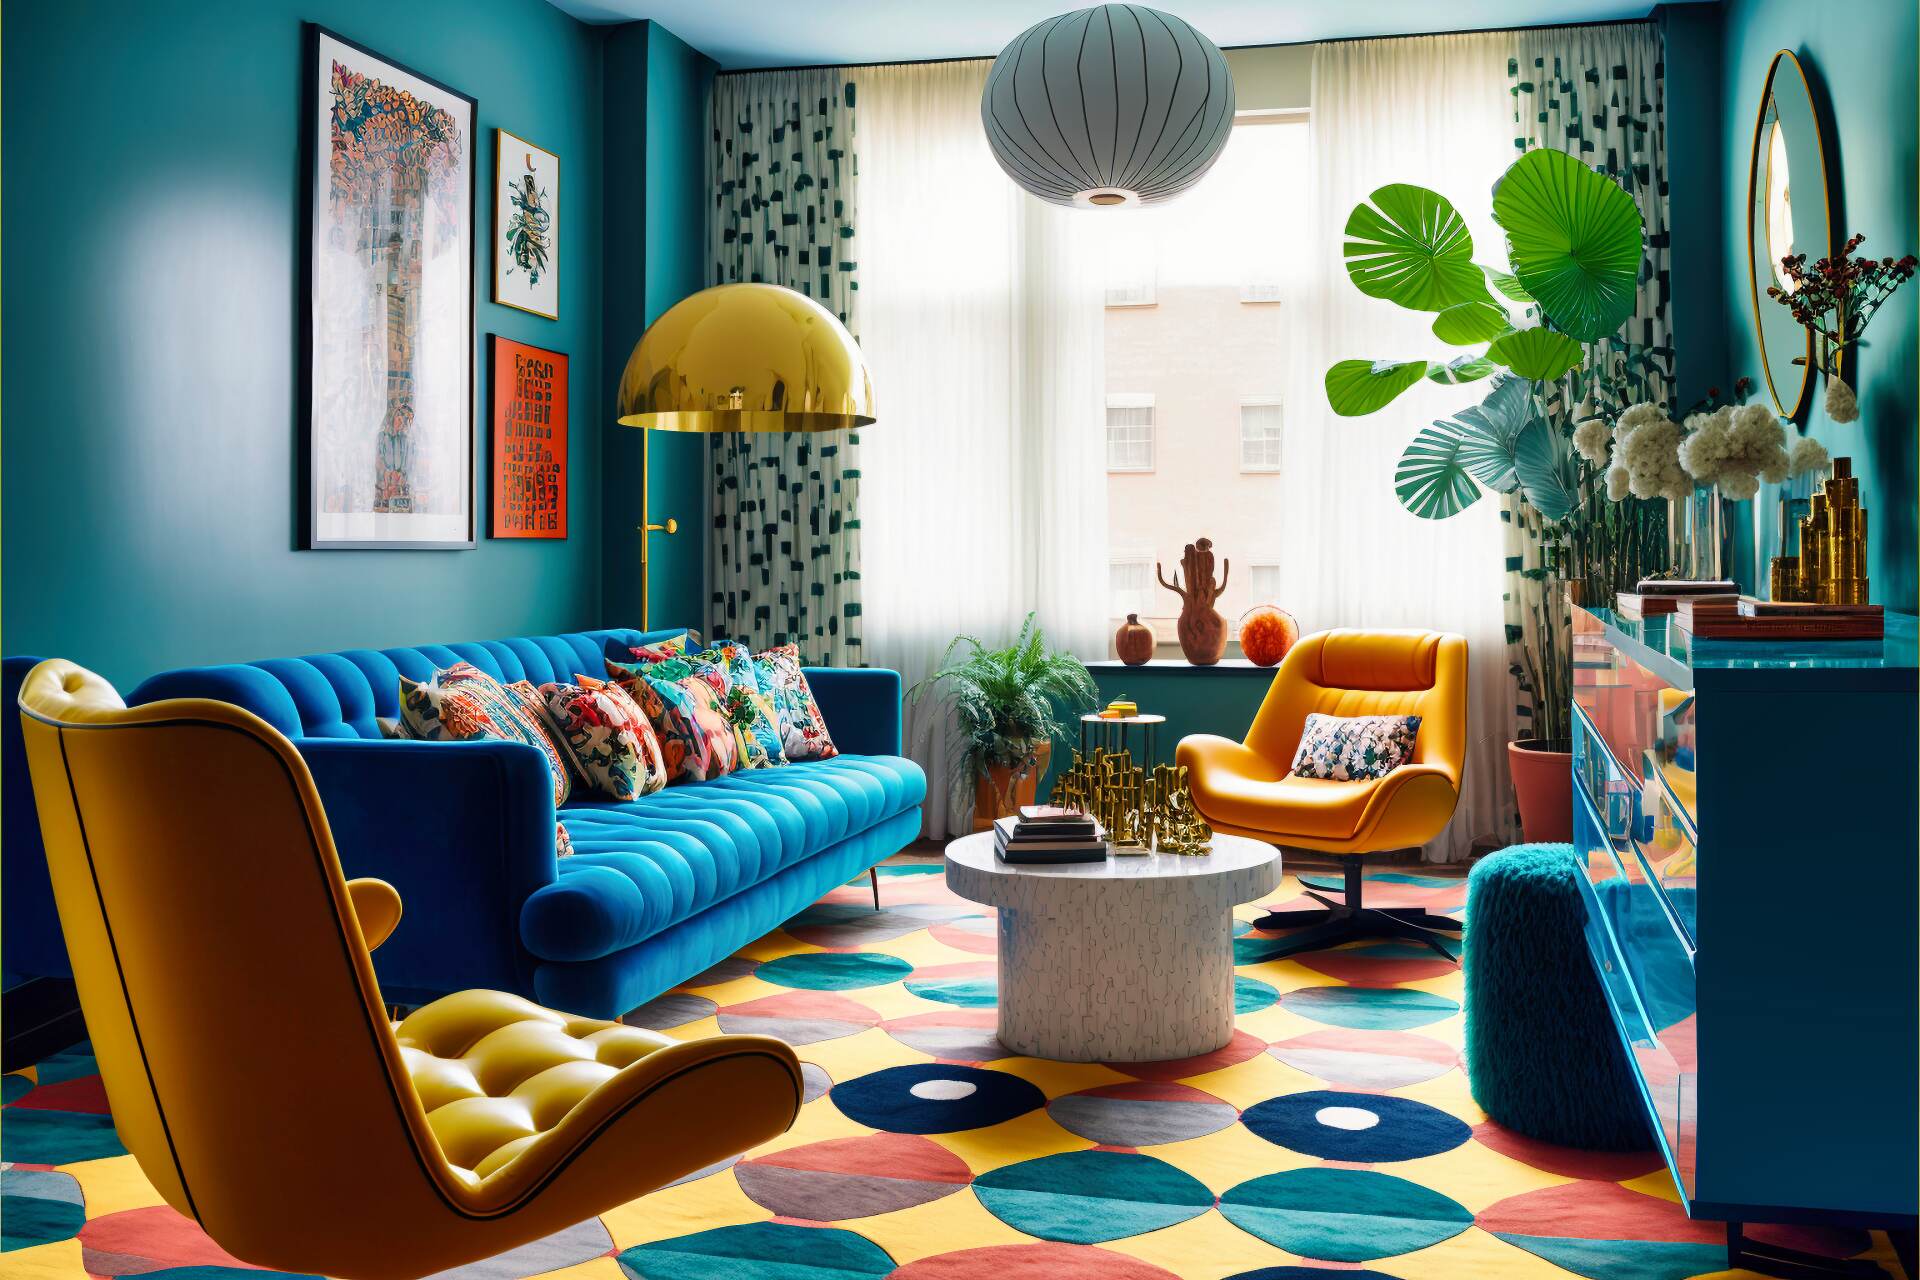 Artistic And Vibrant Living Room - Bringing Elements Of The 1970S Into The Modern-Day Is This Lively Maximalist Living Room. Armchairs And A Retro Sofa Of The Same Vibrant Hue Provide Seating, While A Geometric Patterned Rug Adds Flair To The Floor. Key Elements Such As A Unique Chandelier, Wall Art, And A Plant-Filled Corner Create An Artistic Energy While A Wood-Framed Flat-Screen Tv Adds Practical Functionality.